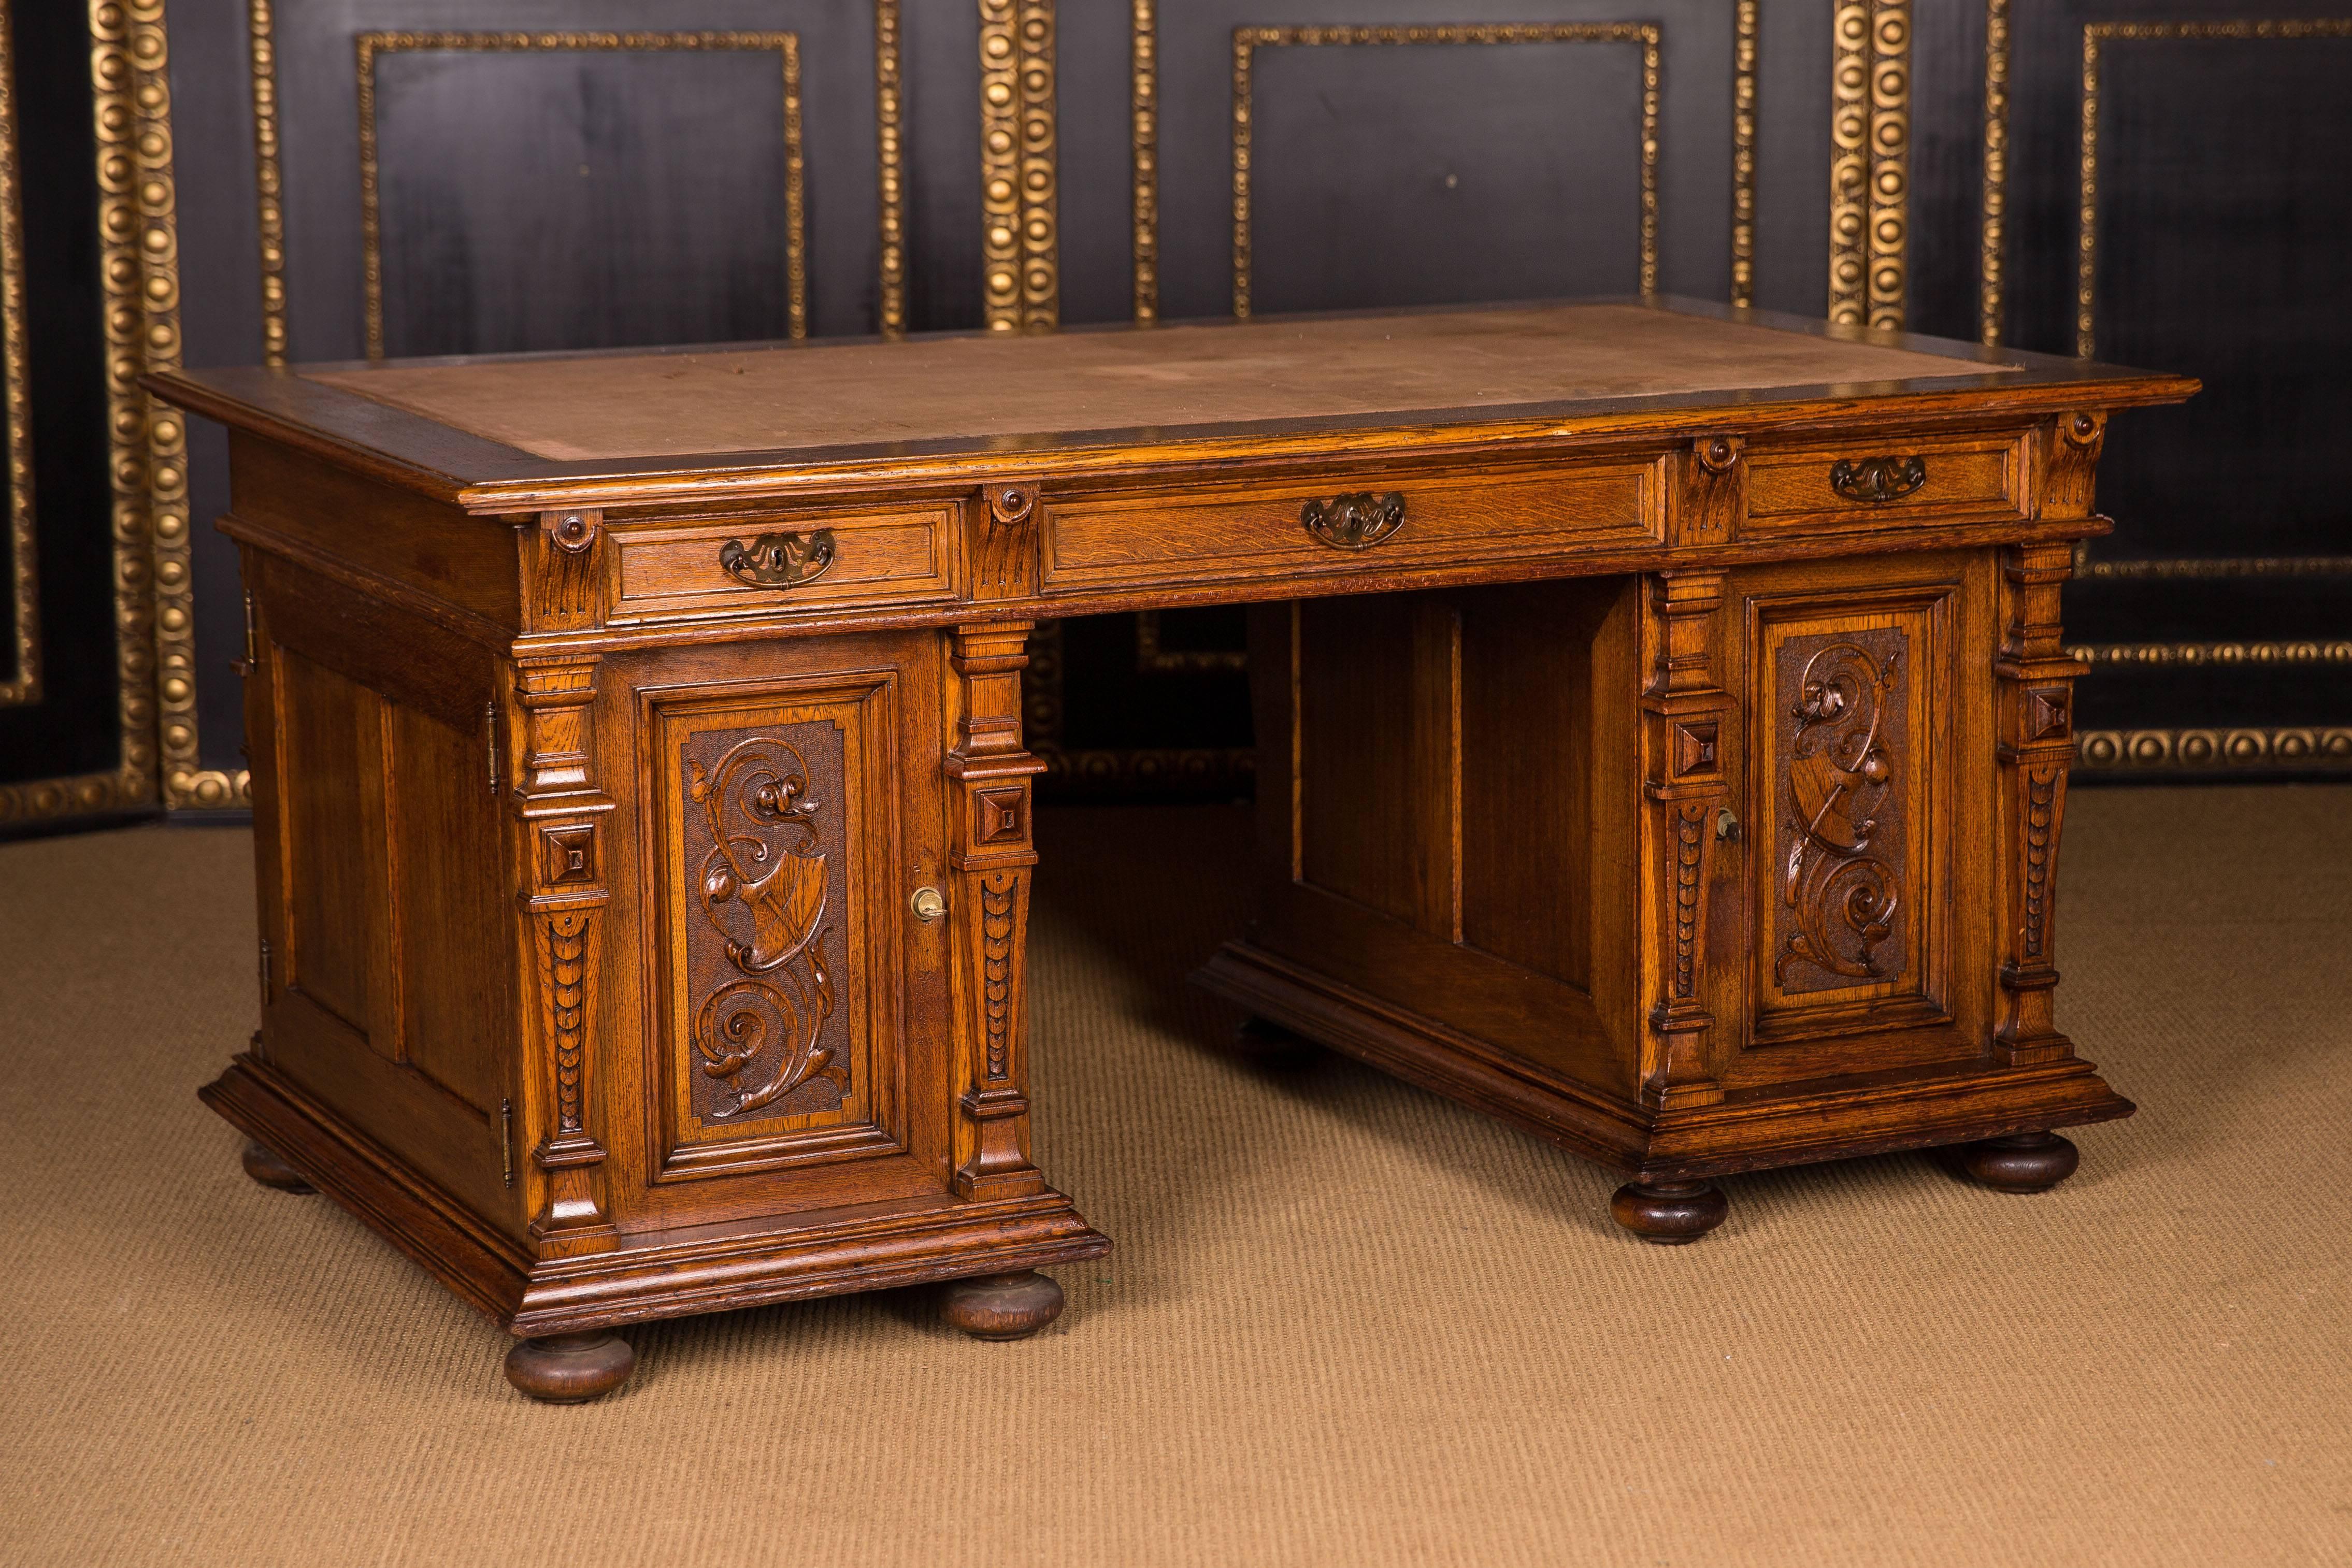 Also-called partner desk. On both sides with doors and drawers.

Solid oak. Rich carved desk. Three-part straight frame base. Slightly overlapping writing plate. Three drawers of different sizes, with a wide knee pocket. Flanked on both sides by